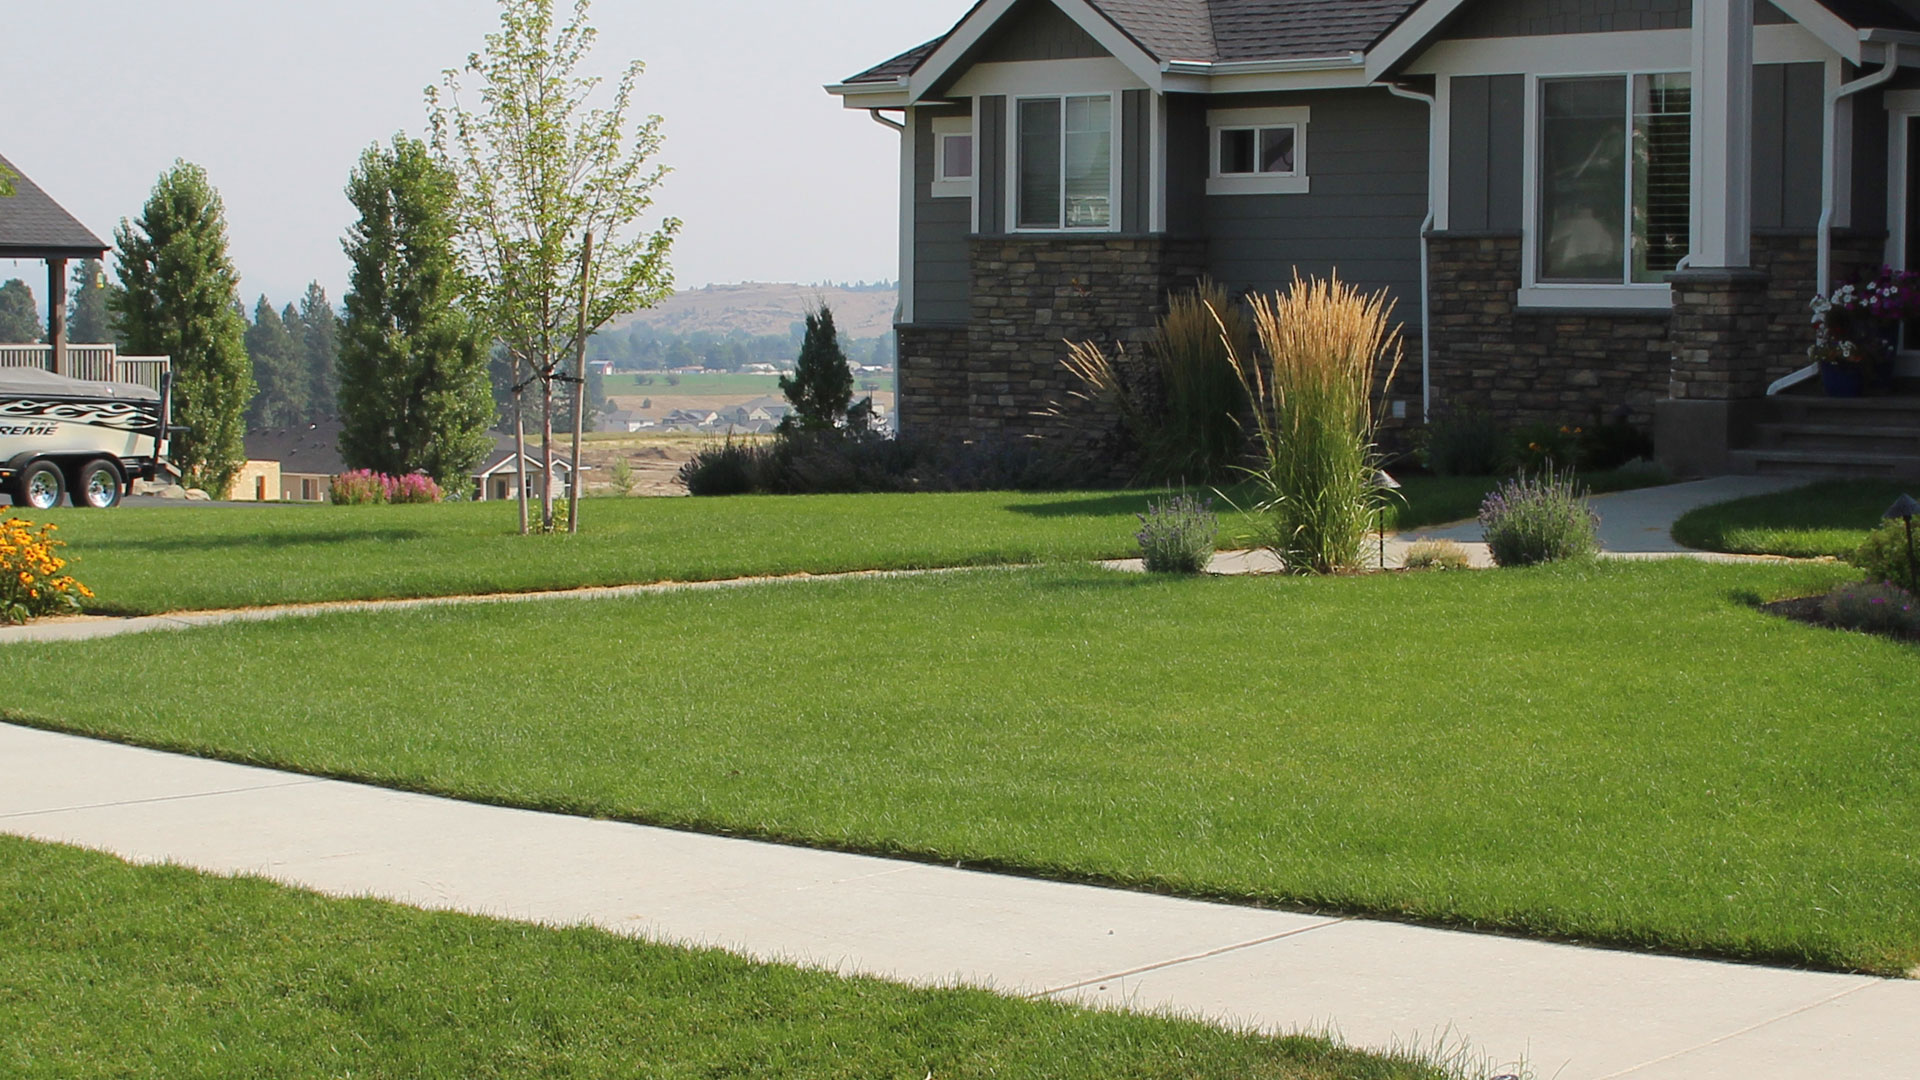 Our lawn care services helped this lawn in Spokane Valley, WA become healthy.